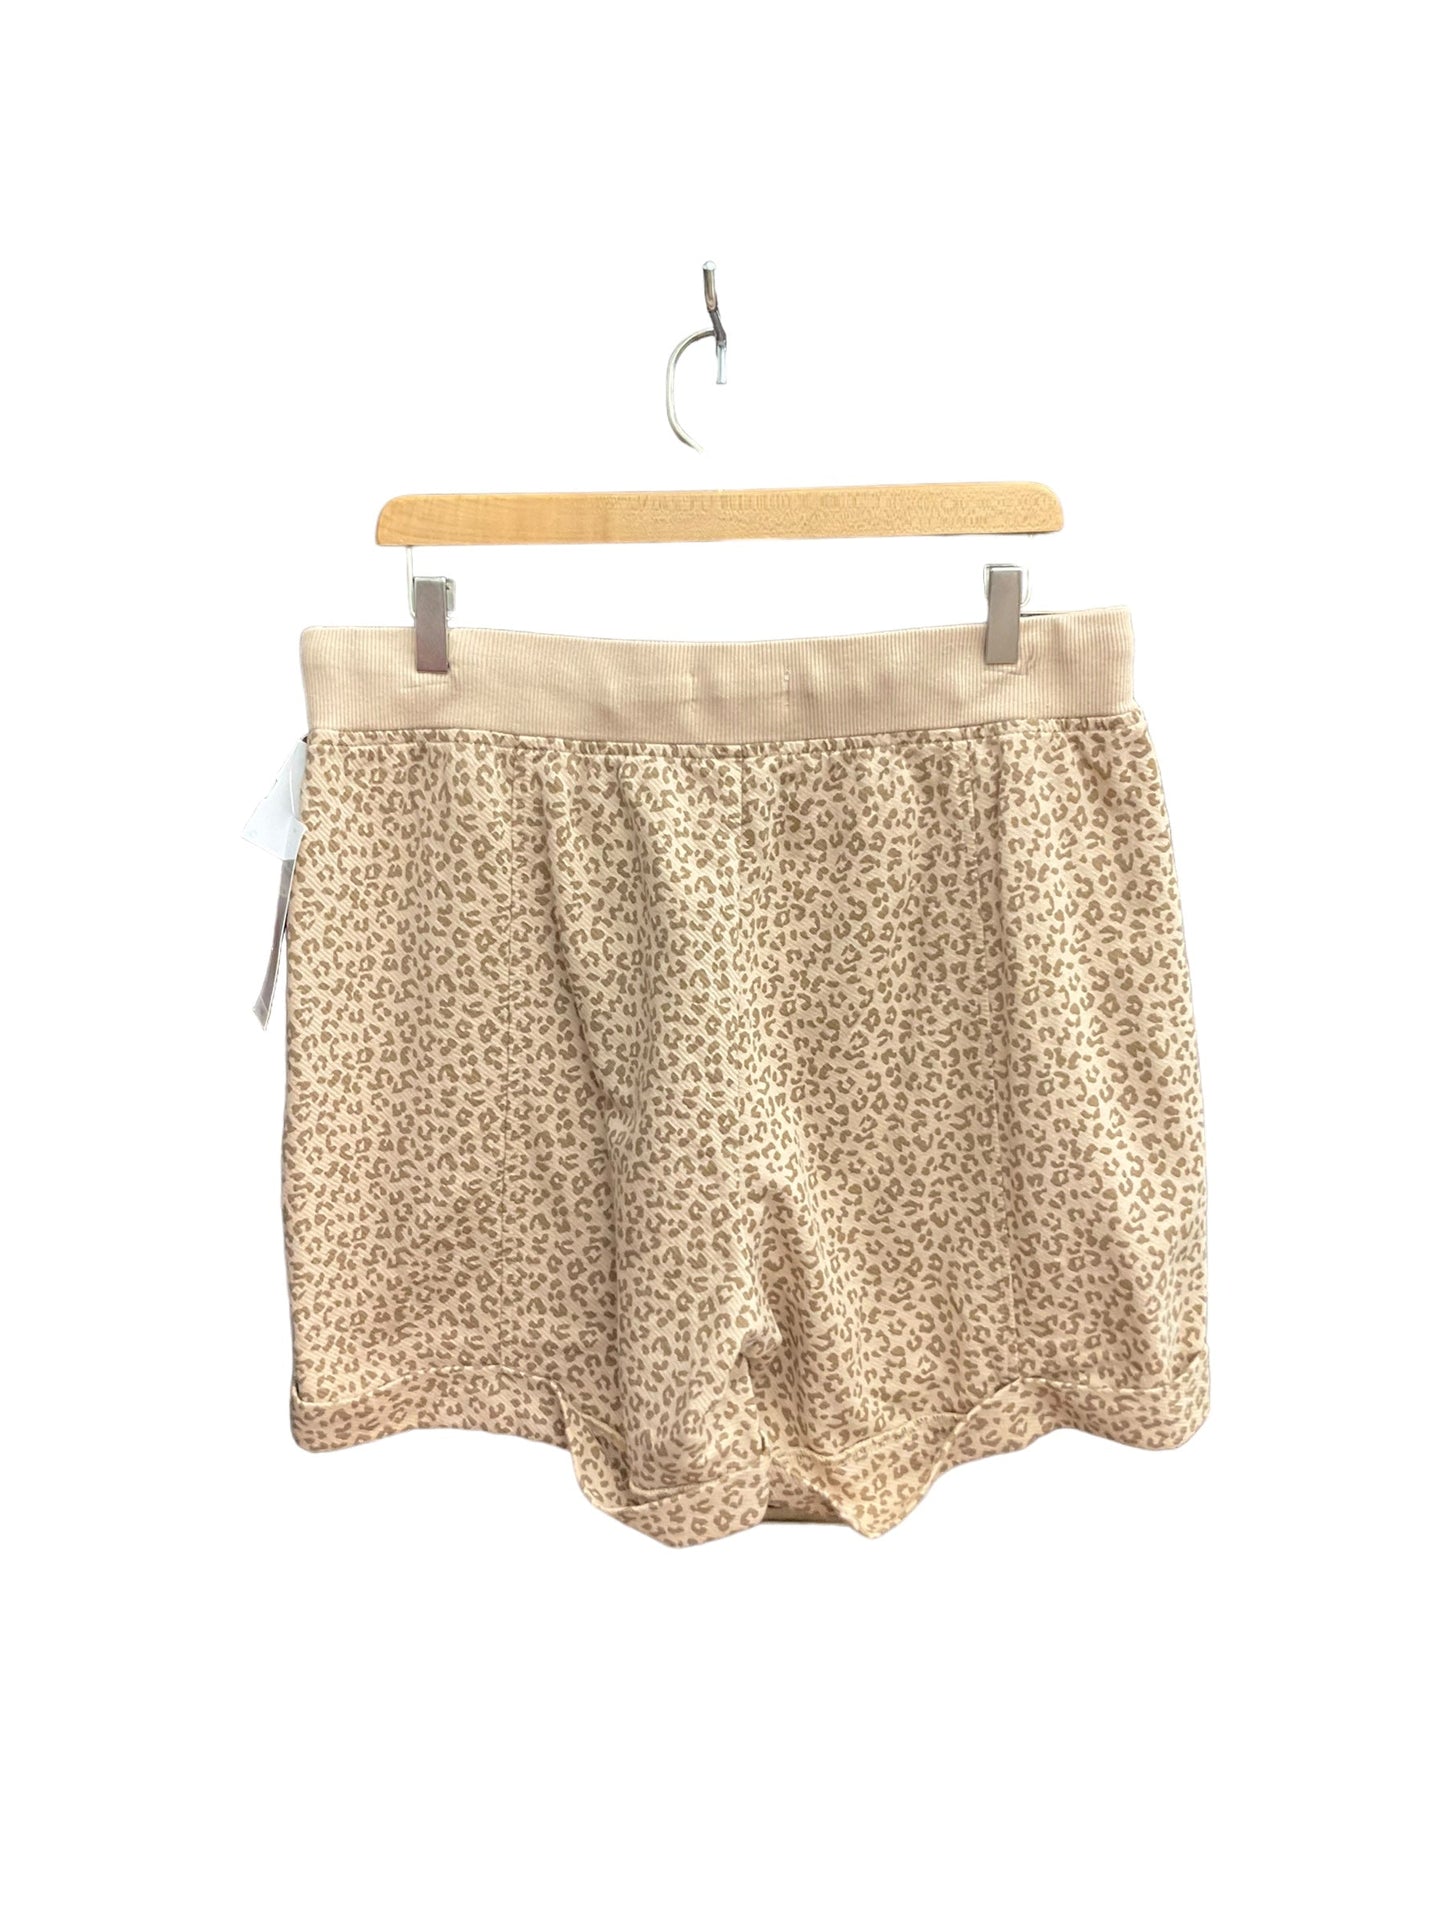 Animal Print Shorts New Directions, Size 16